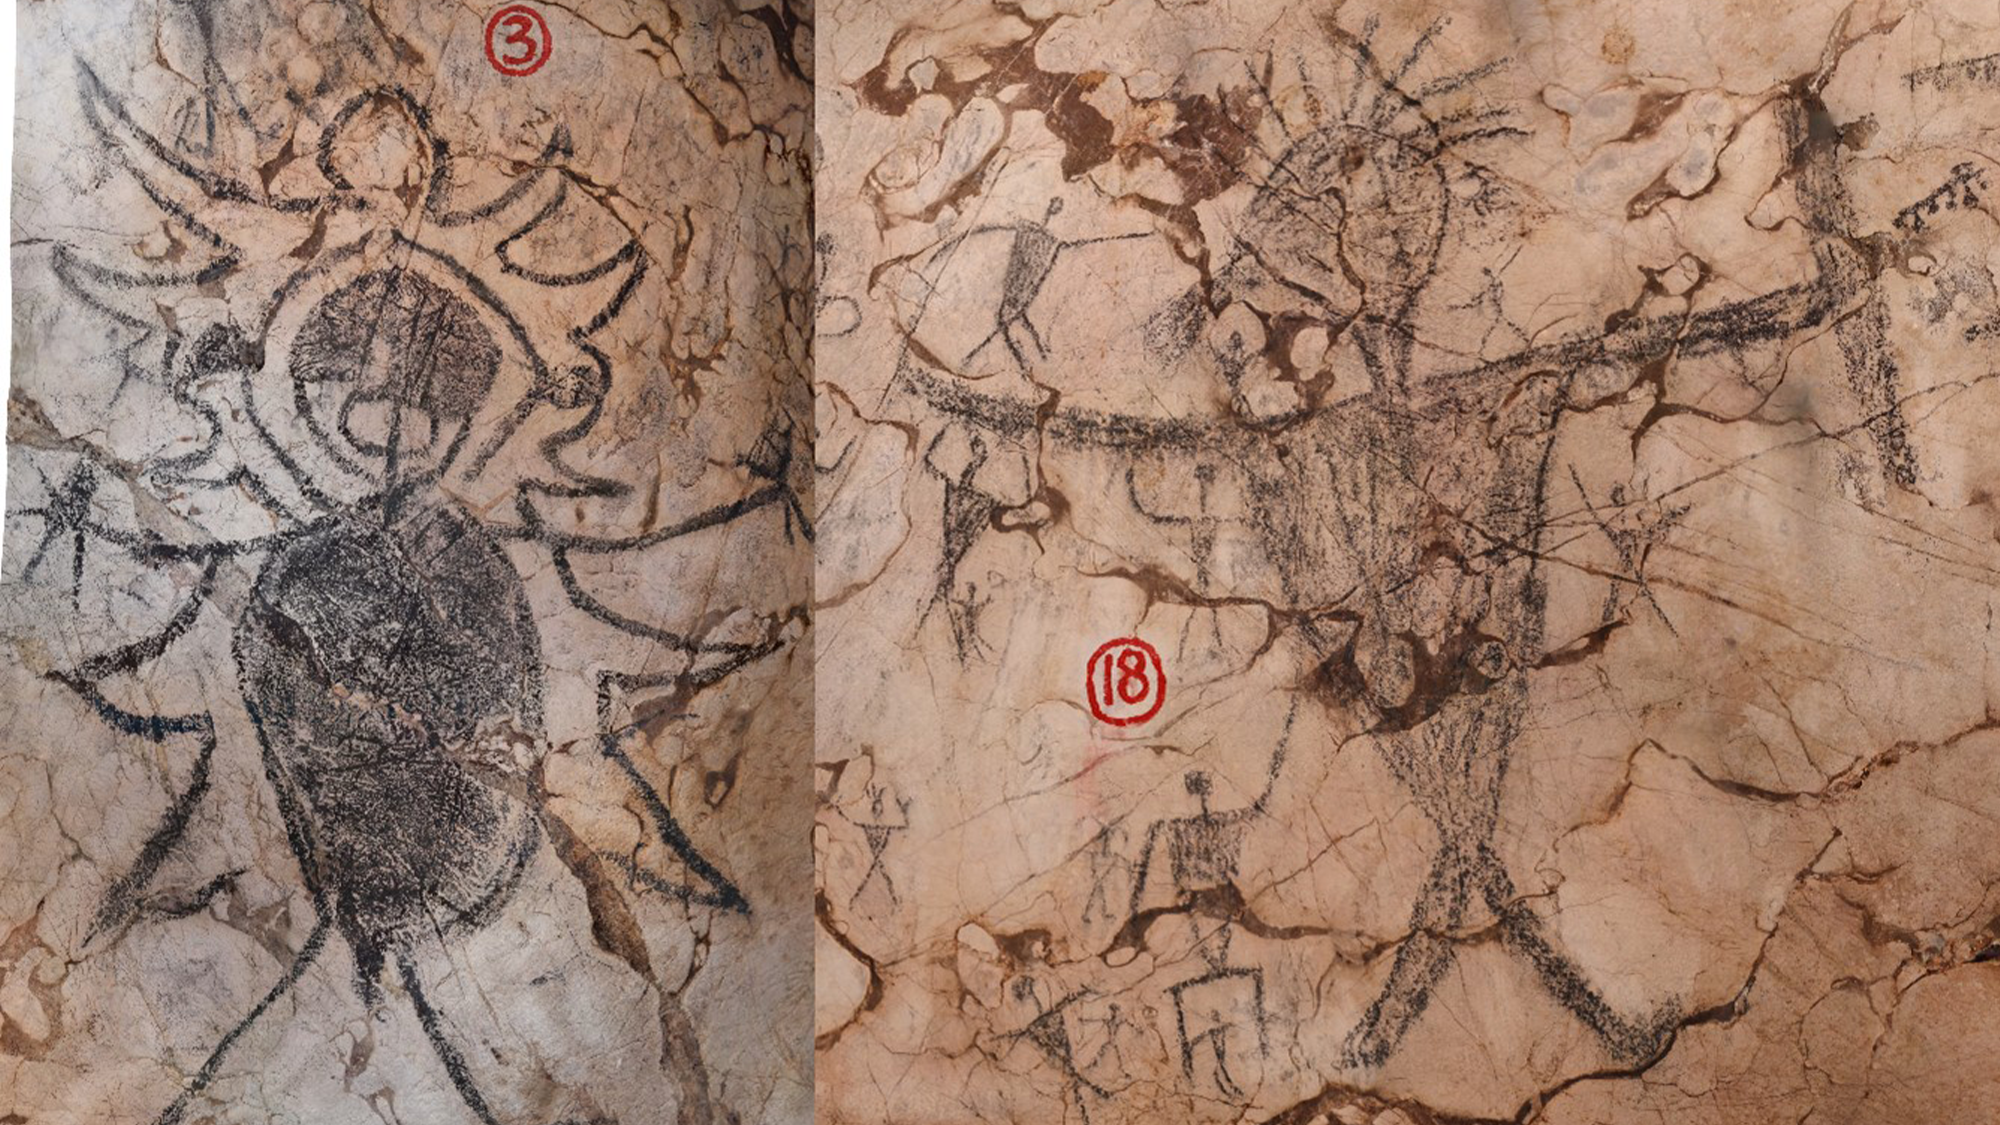 Newly dated cave art tells a dark story in Borneo’s history